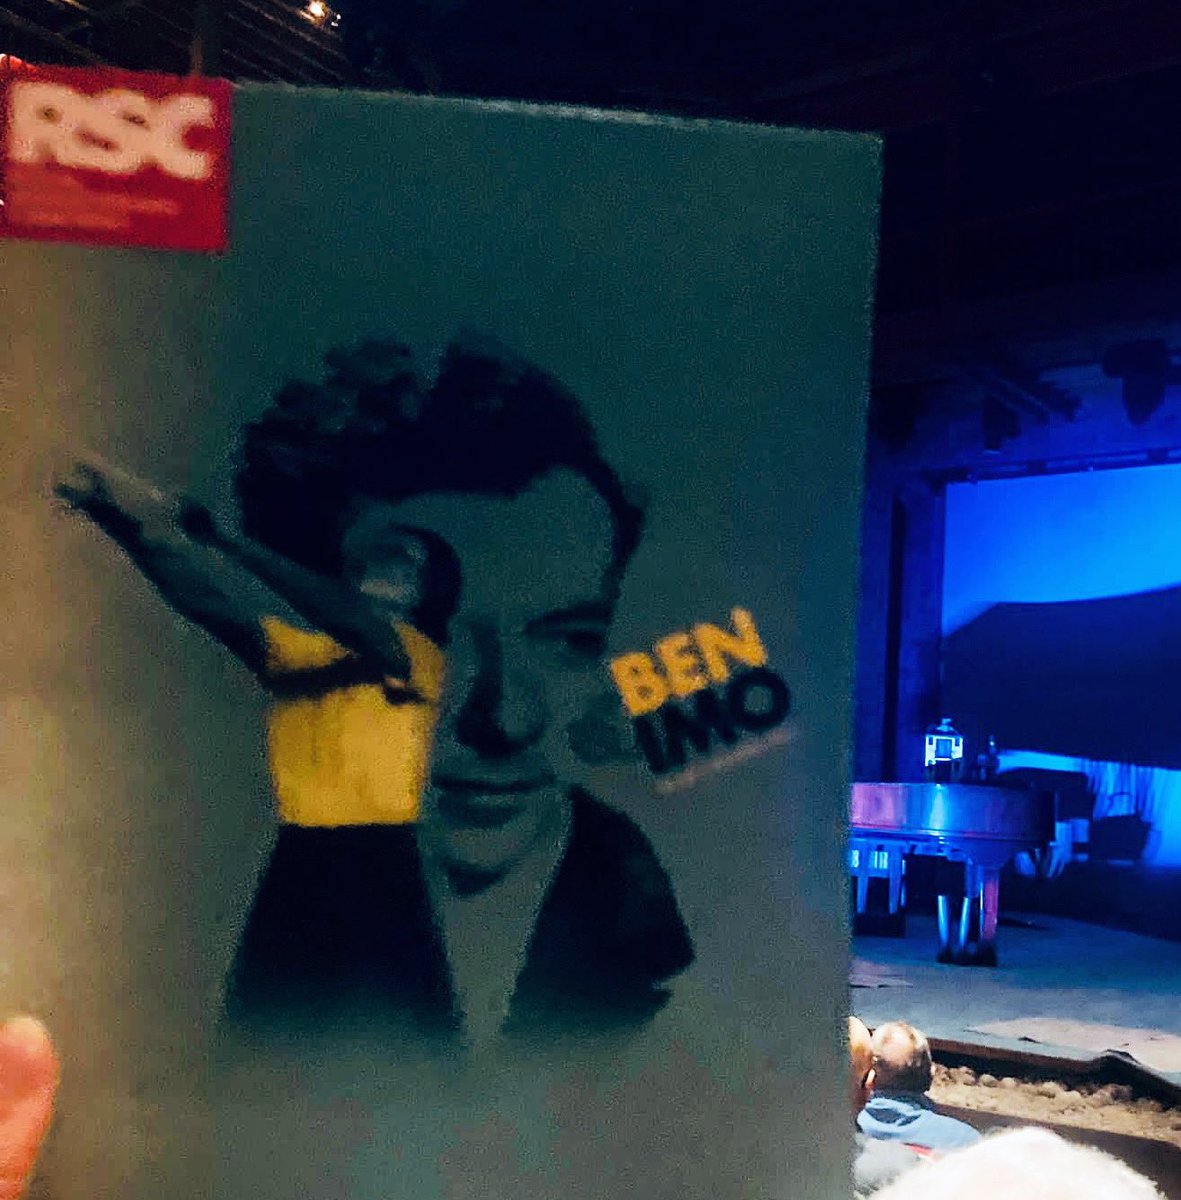 Theatre No 4 
I loved Ben & Imo! @thersc 

2 amazing actors, a piano and a great script, great sound & lighting too, I left wanting to know more… highly recommend!      #theatre #rsc #talent #actor #actress #composer #benjaminbritten #imogenholst